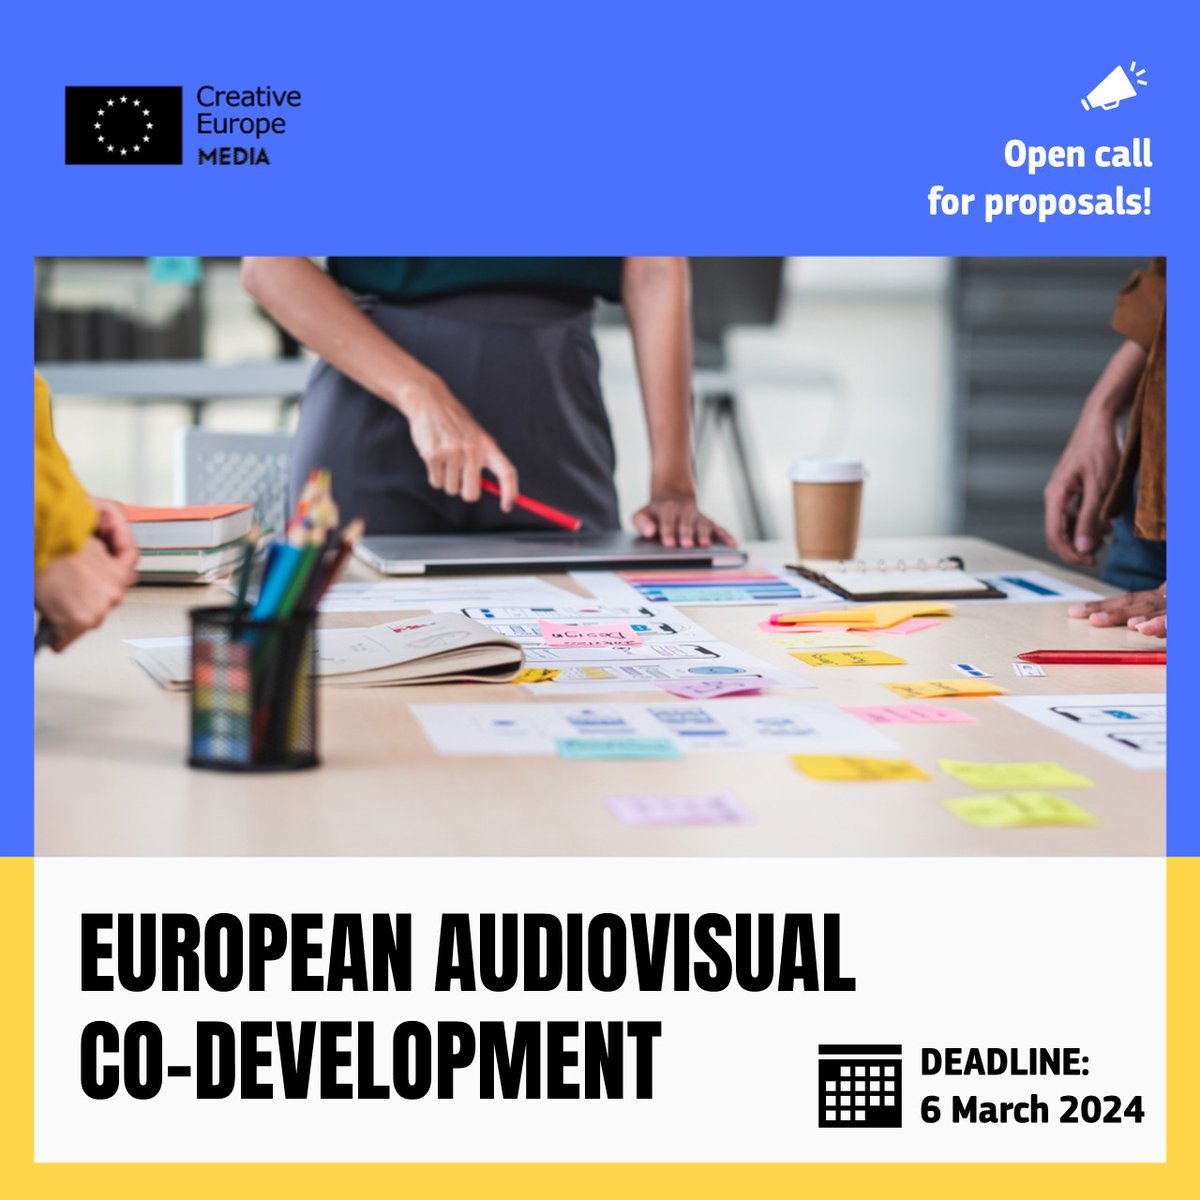 #MEDIAProgEU Apply for European Co-development Call by 6th March 2024. Supports co-development of #animation, creative #documentary or #fiction project for #cinema, #TV or #digital platforms by production companies from 2 different EU countries. tinyurl.com/4uyv3p5x